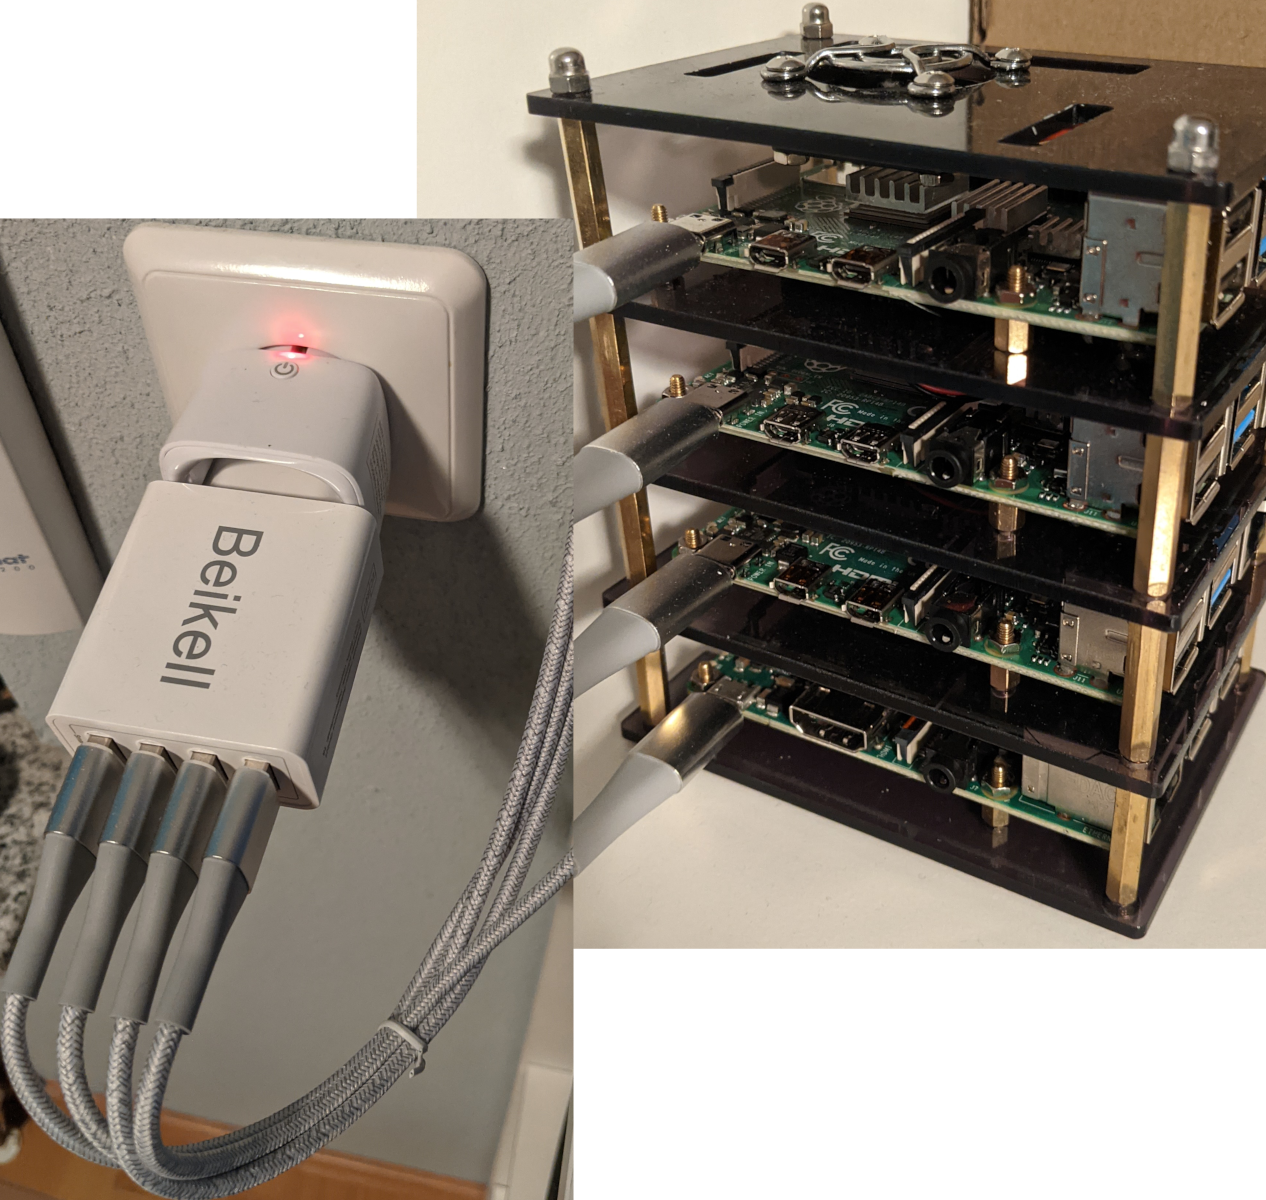 Stack of Raspberry Pis and a zigbee power switch